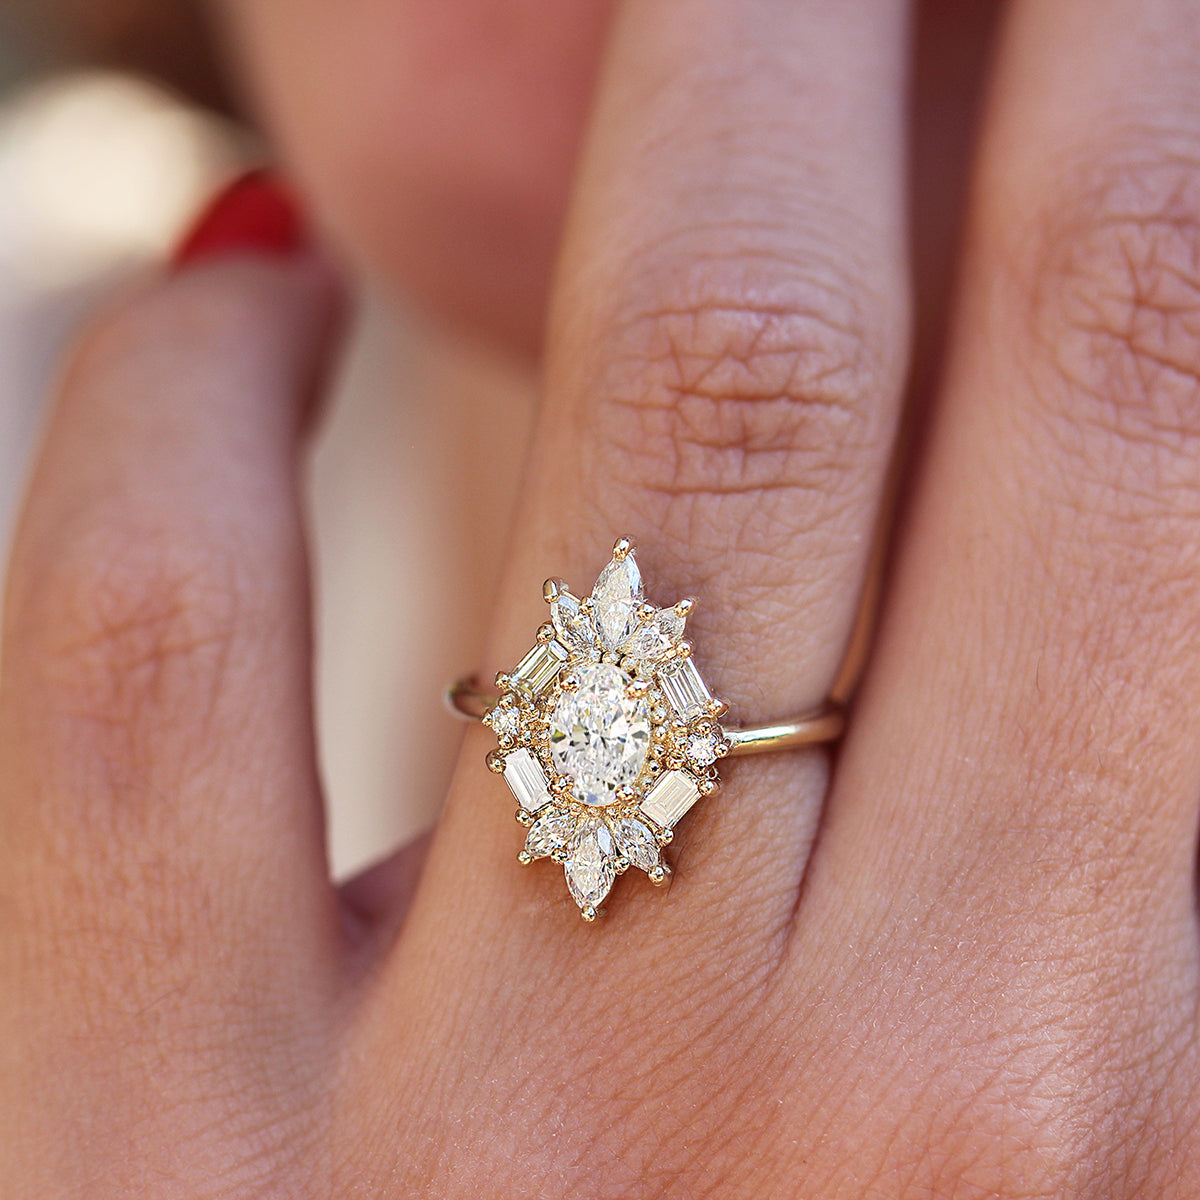 Art Deco Starburst Engagement Ring | Abby Sparks Jewelry